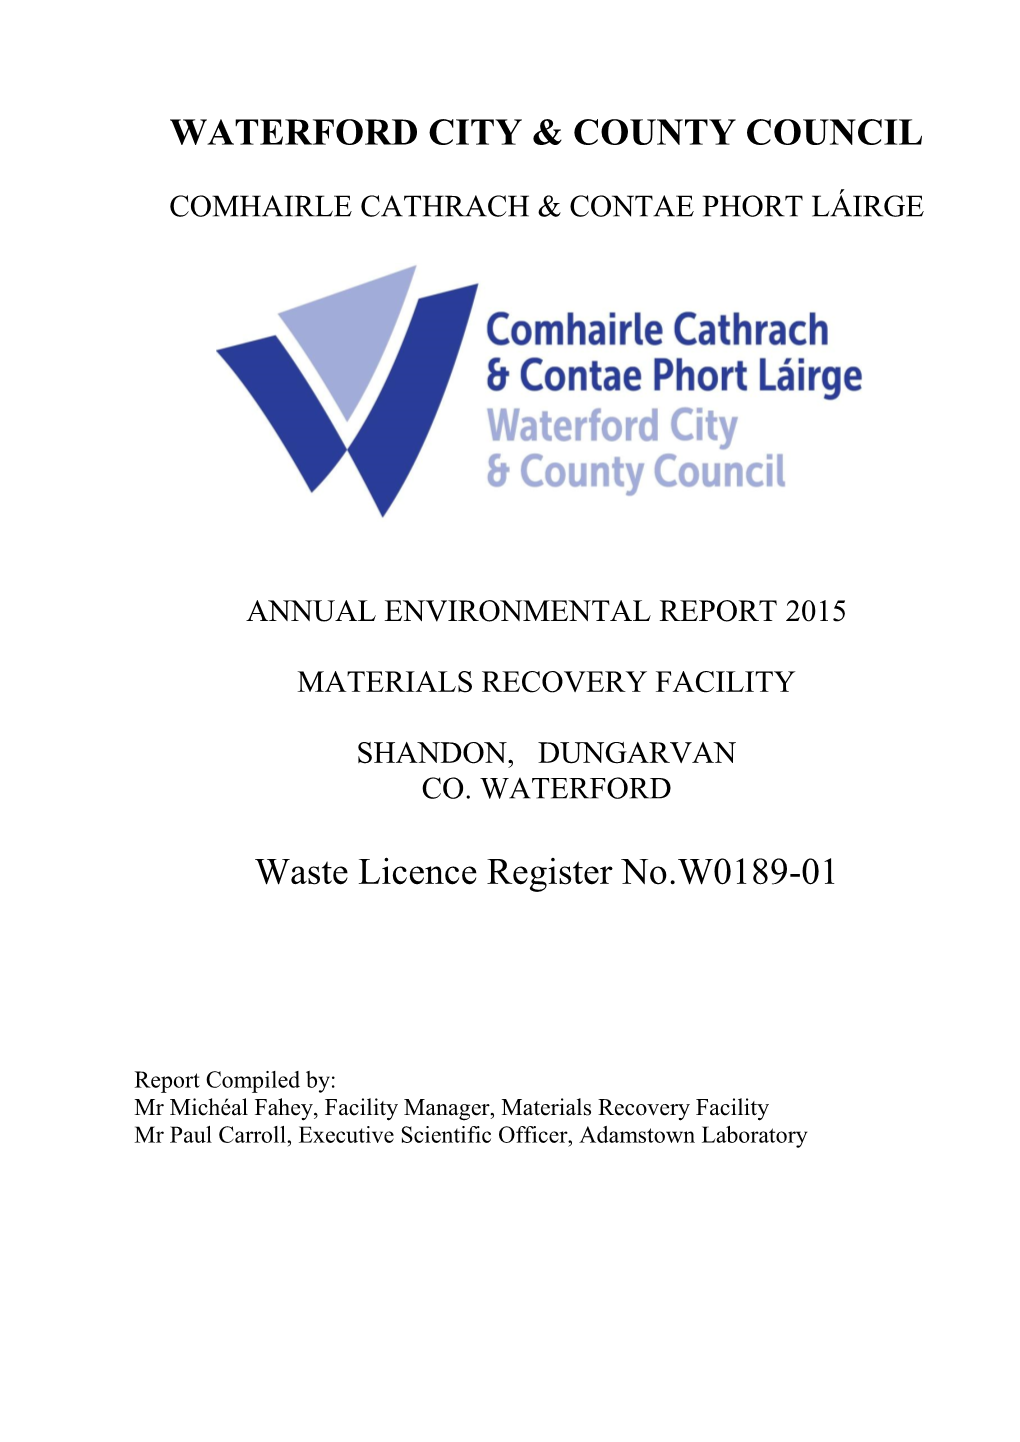 WATERFORD CITY & COUNTY COUNCIL Waste Licence Register No.W0189-01